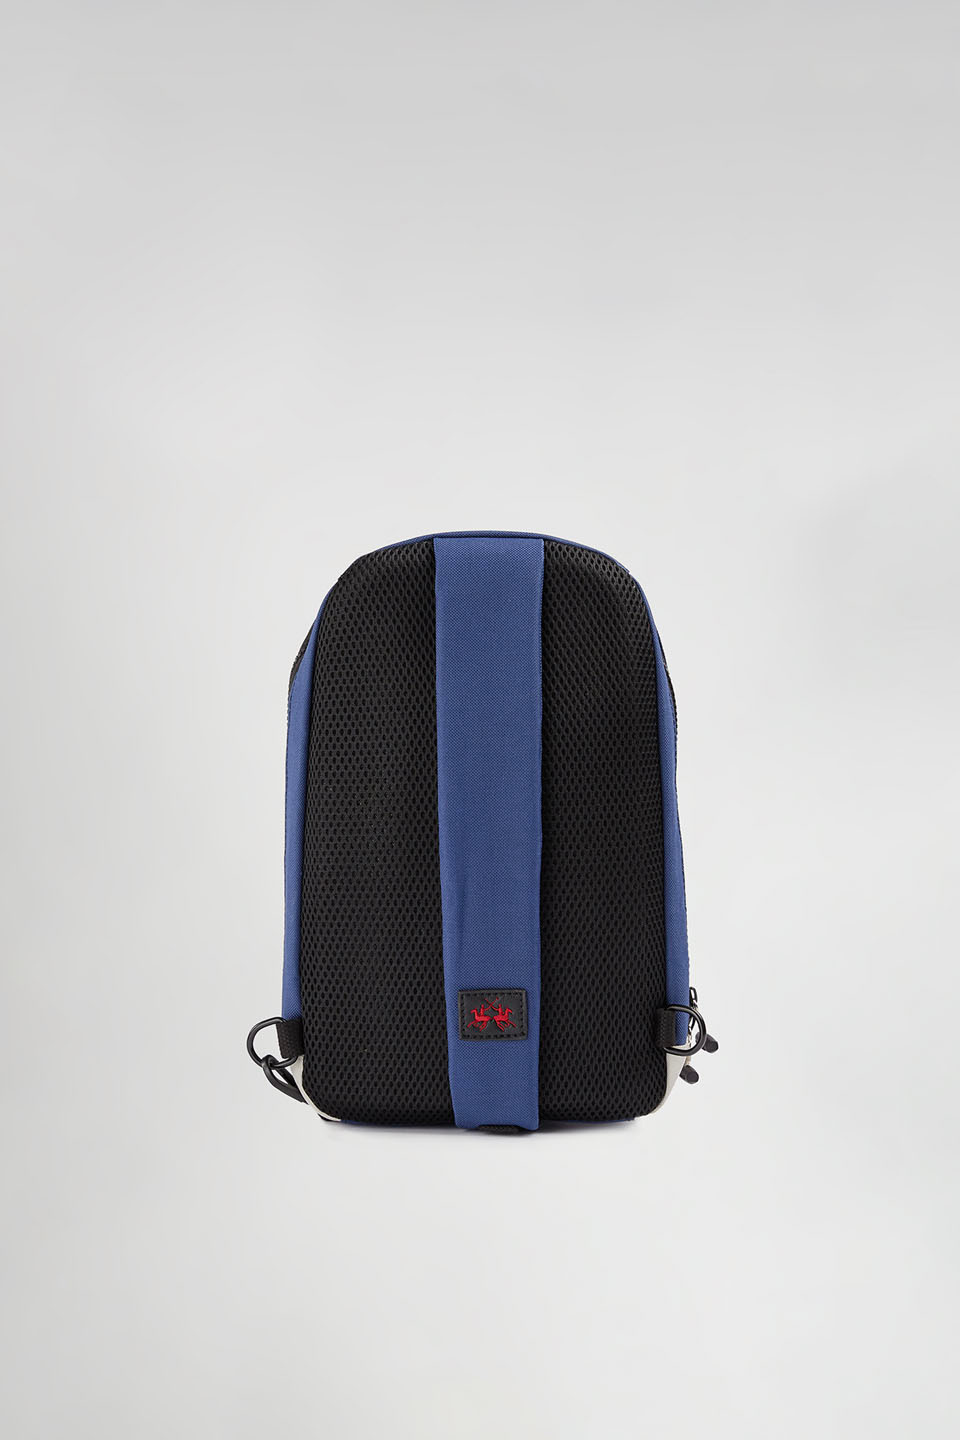 Small polyester crossbody backpack. - La Martina - Official Online Shop